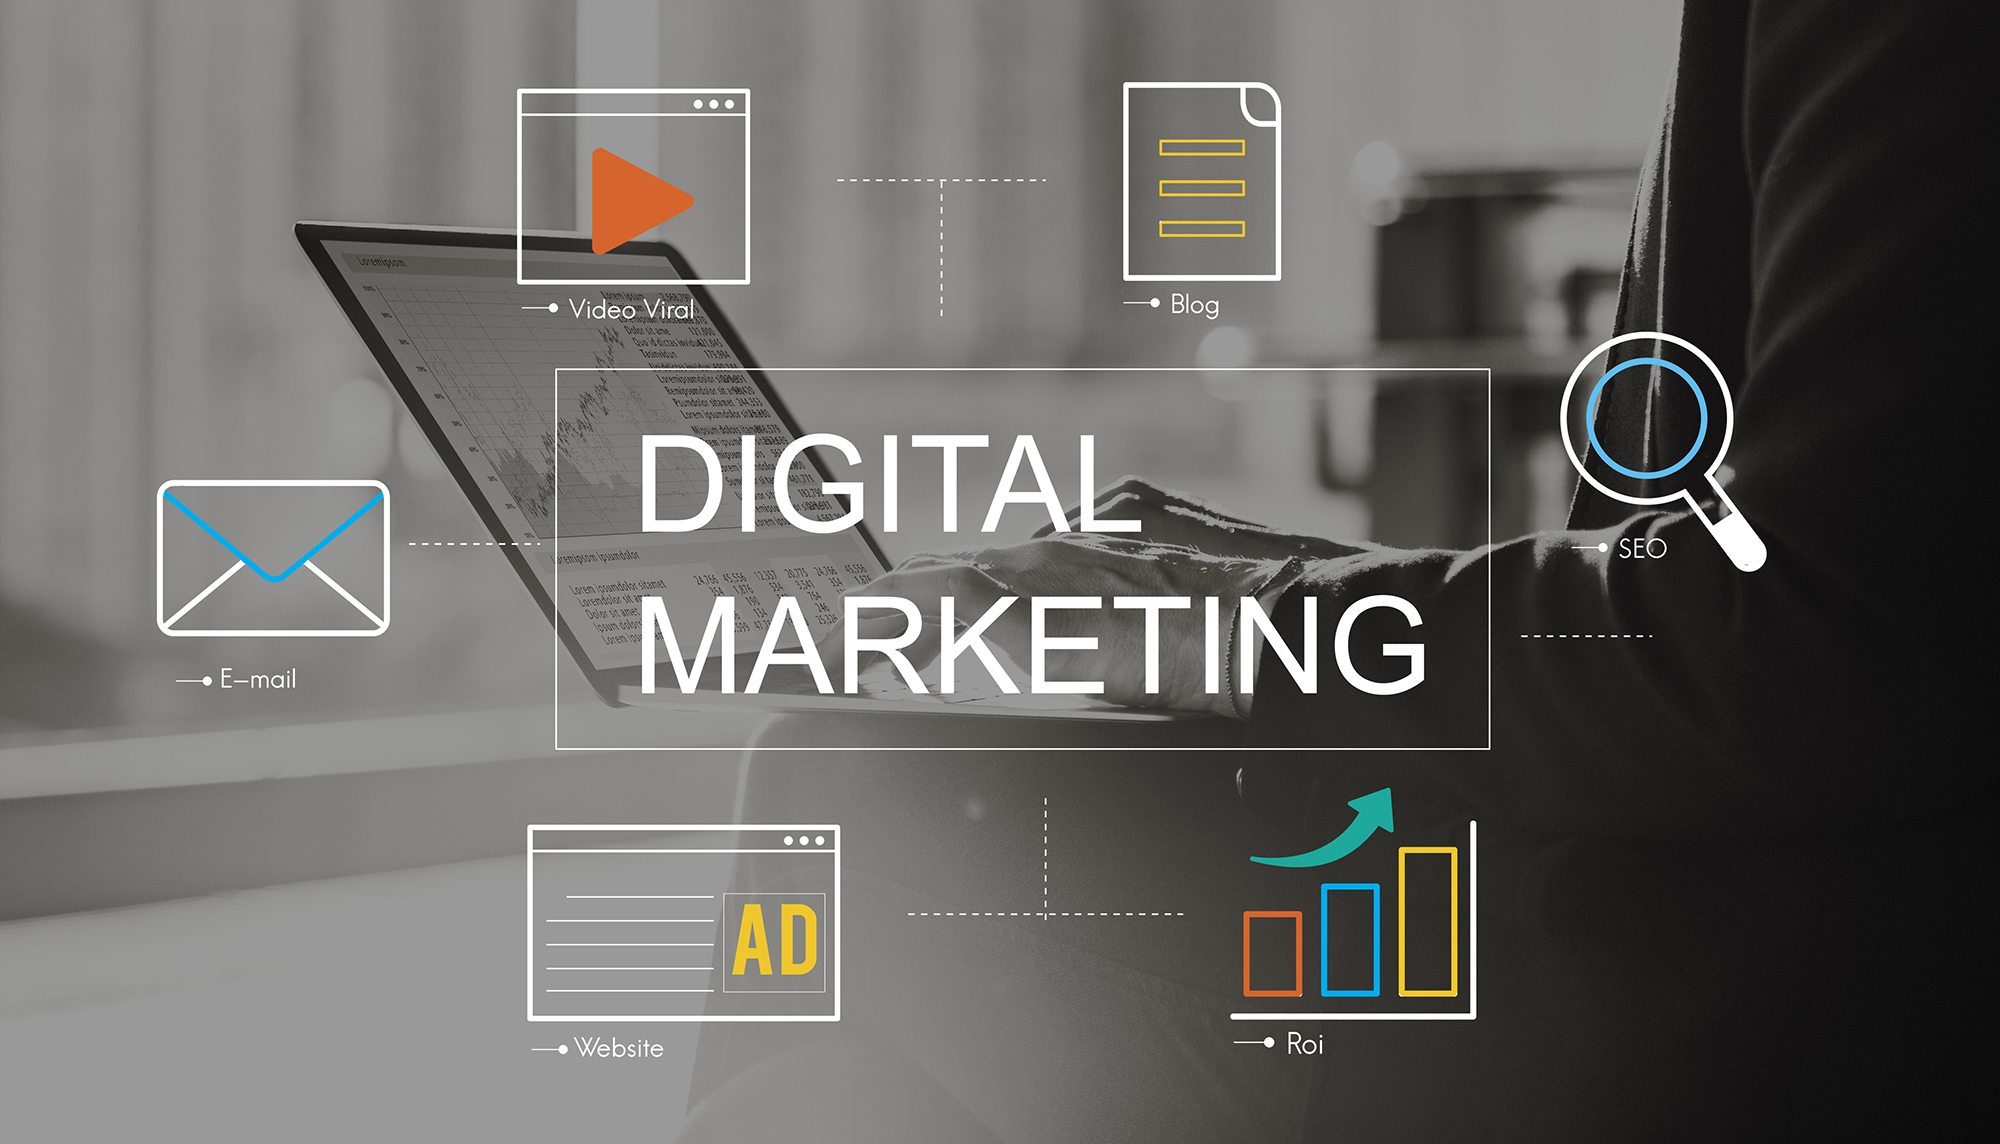 How to Choose the Right Digital Marketing Agency: 5 Must-Haves for Small Business Marketing Success